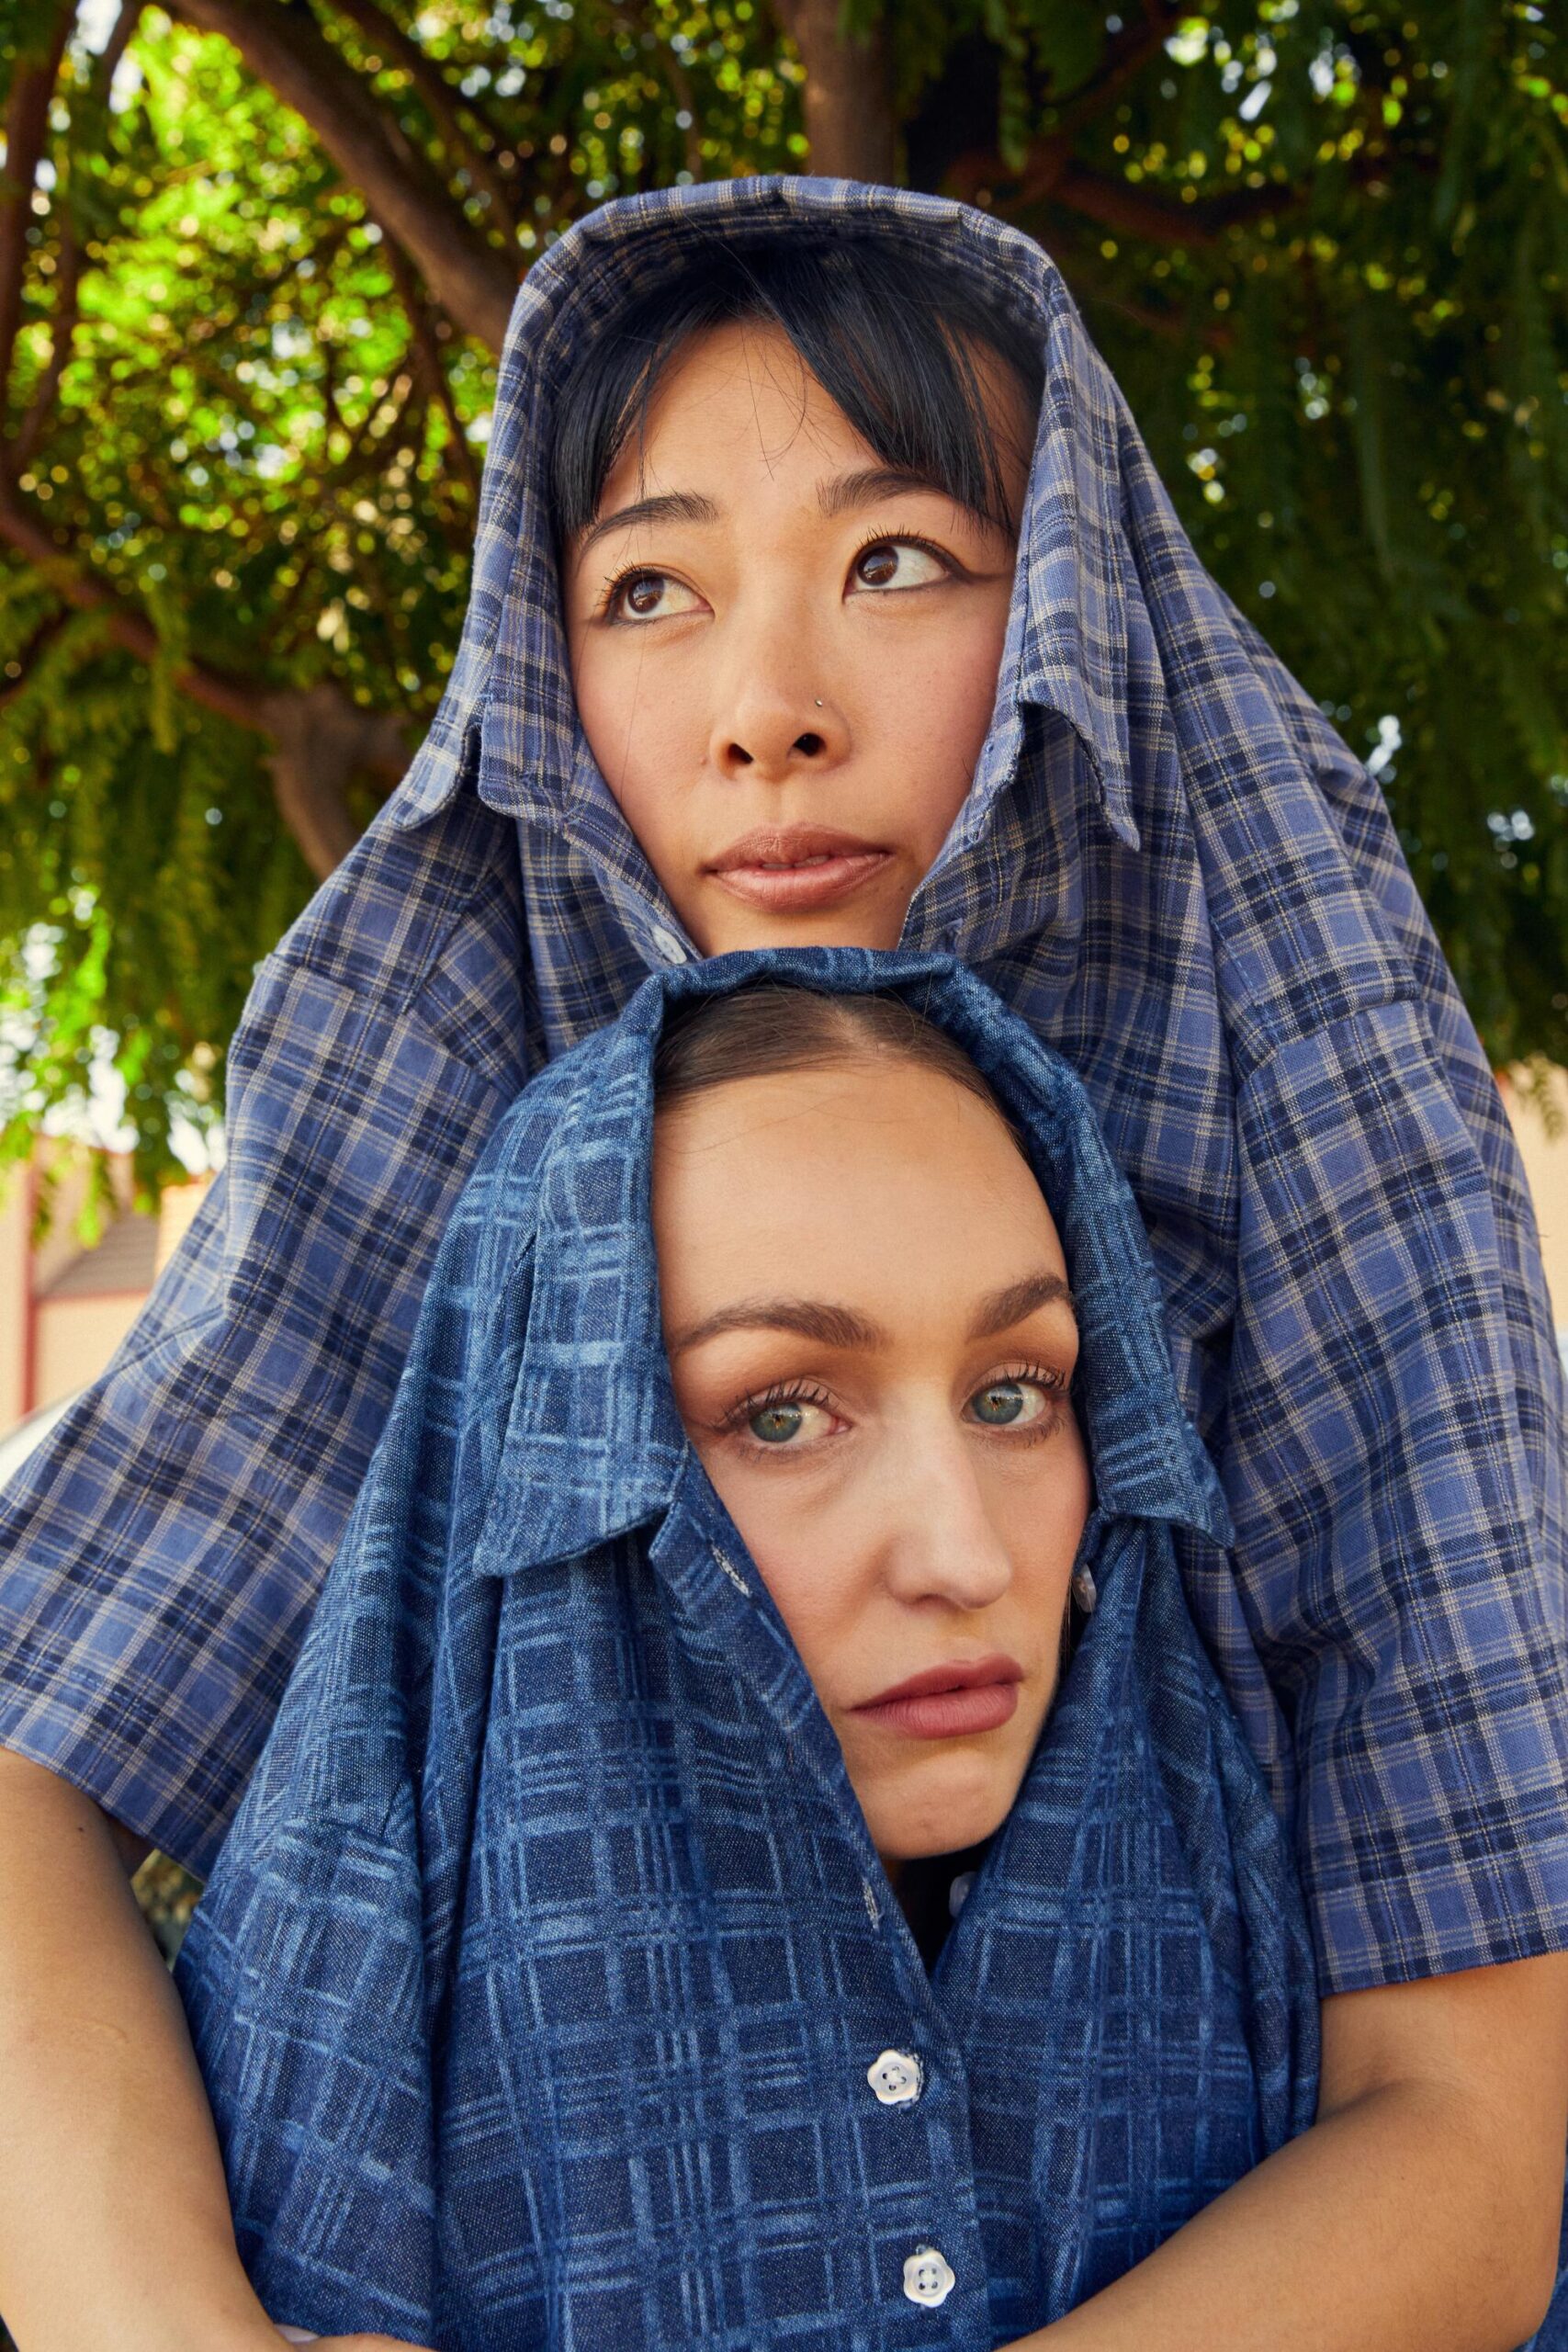 Two women, their heads one above the other peeking out of shirt necks.